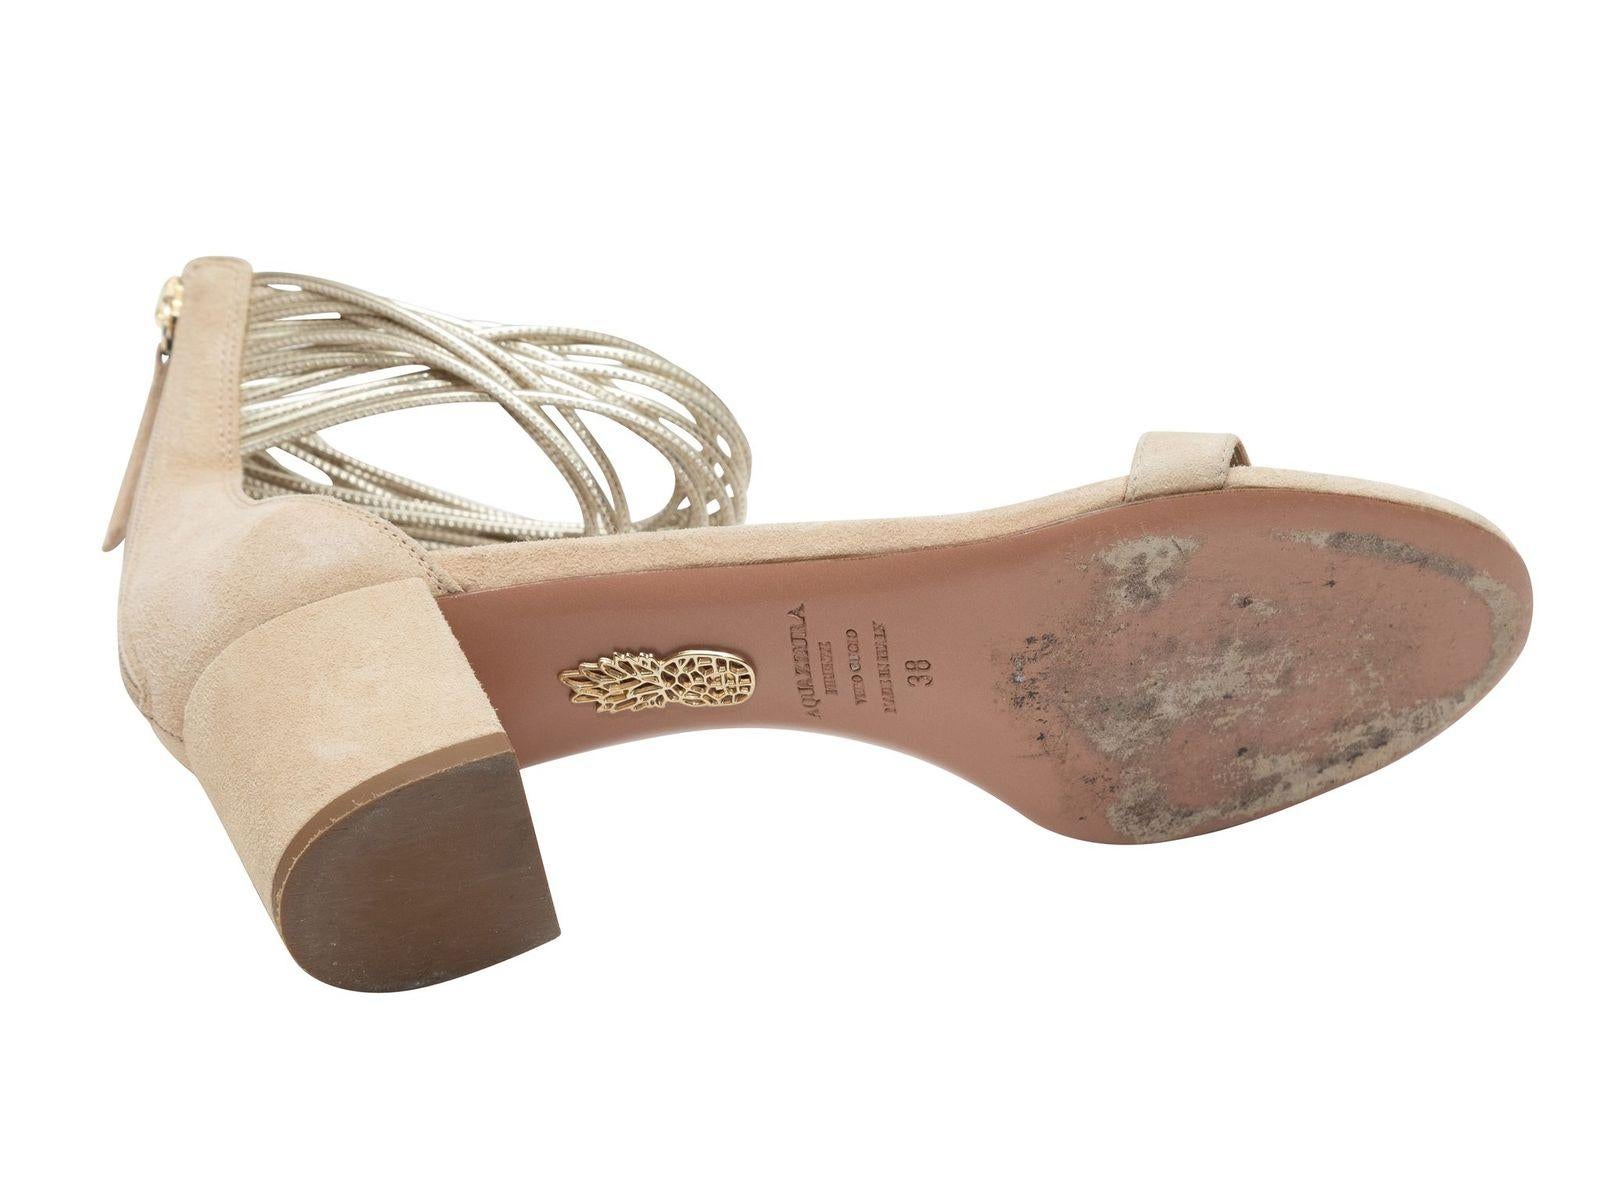 Product Details: Beige suede ankle strap sandals by Aquazzura. Block heels. Zip closures at counters. 2